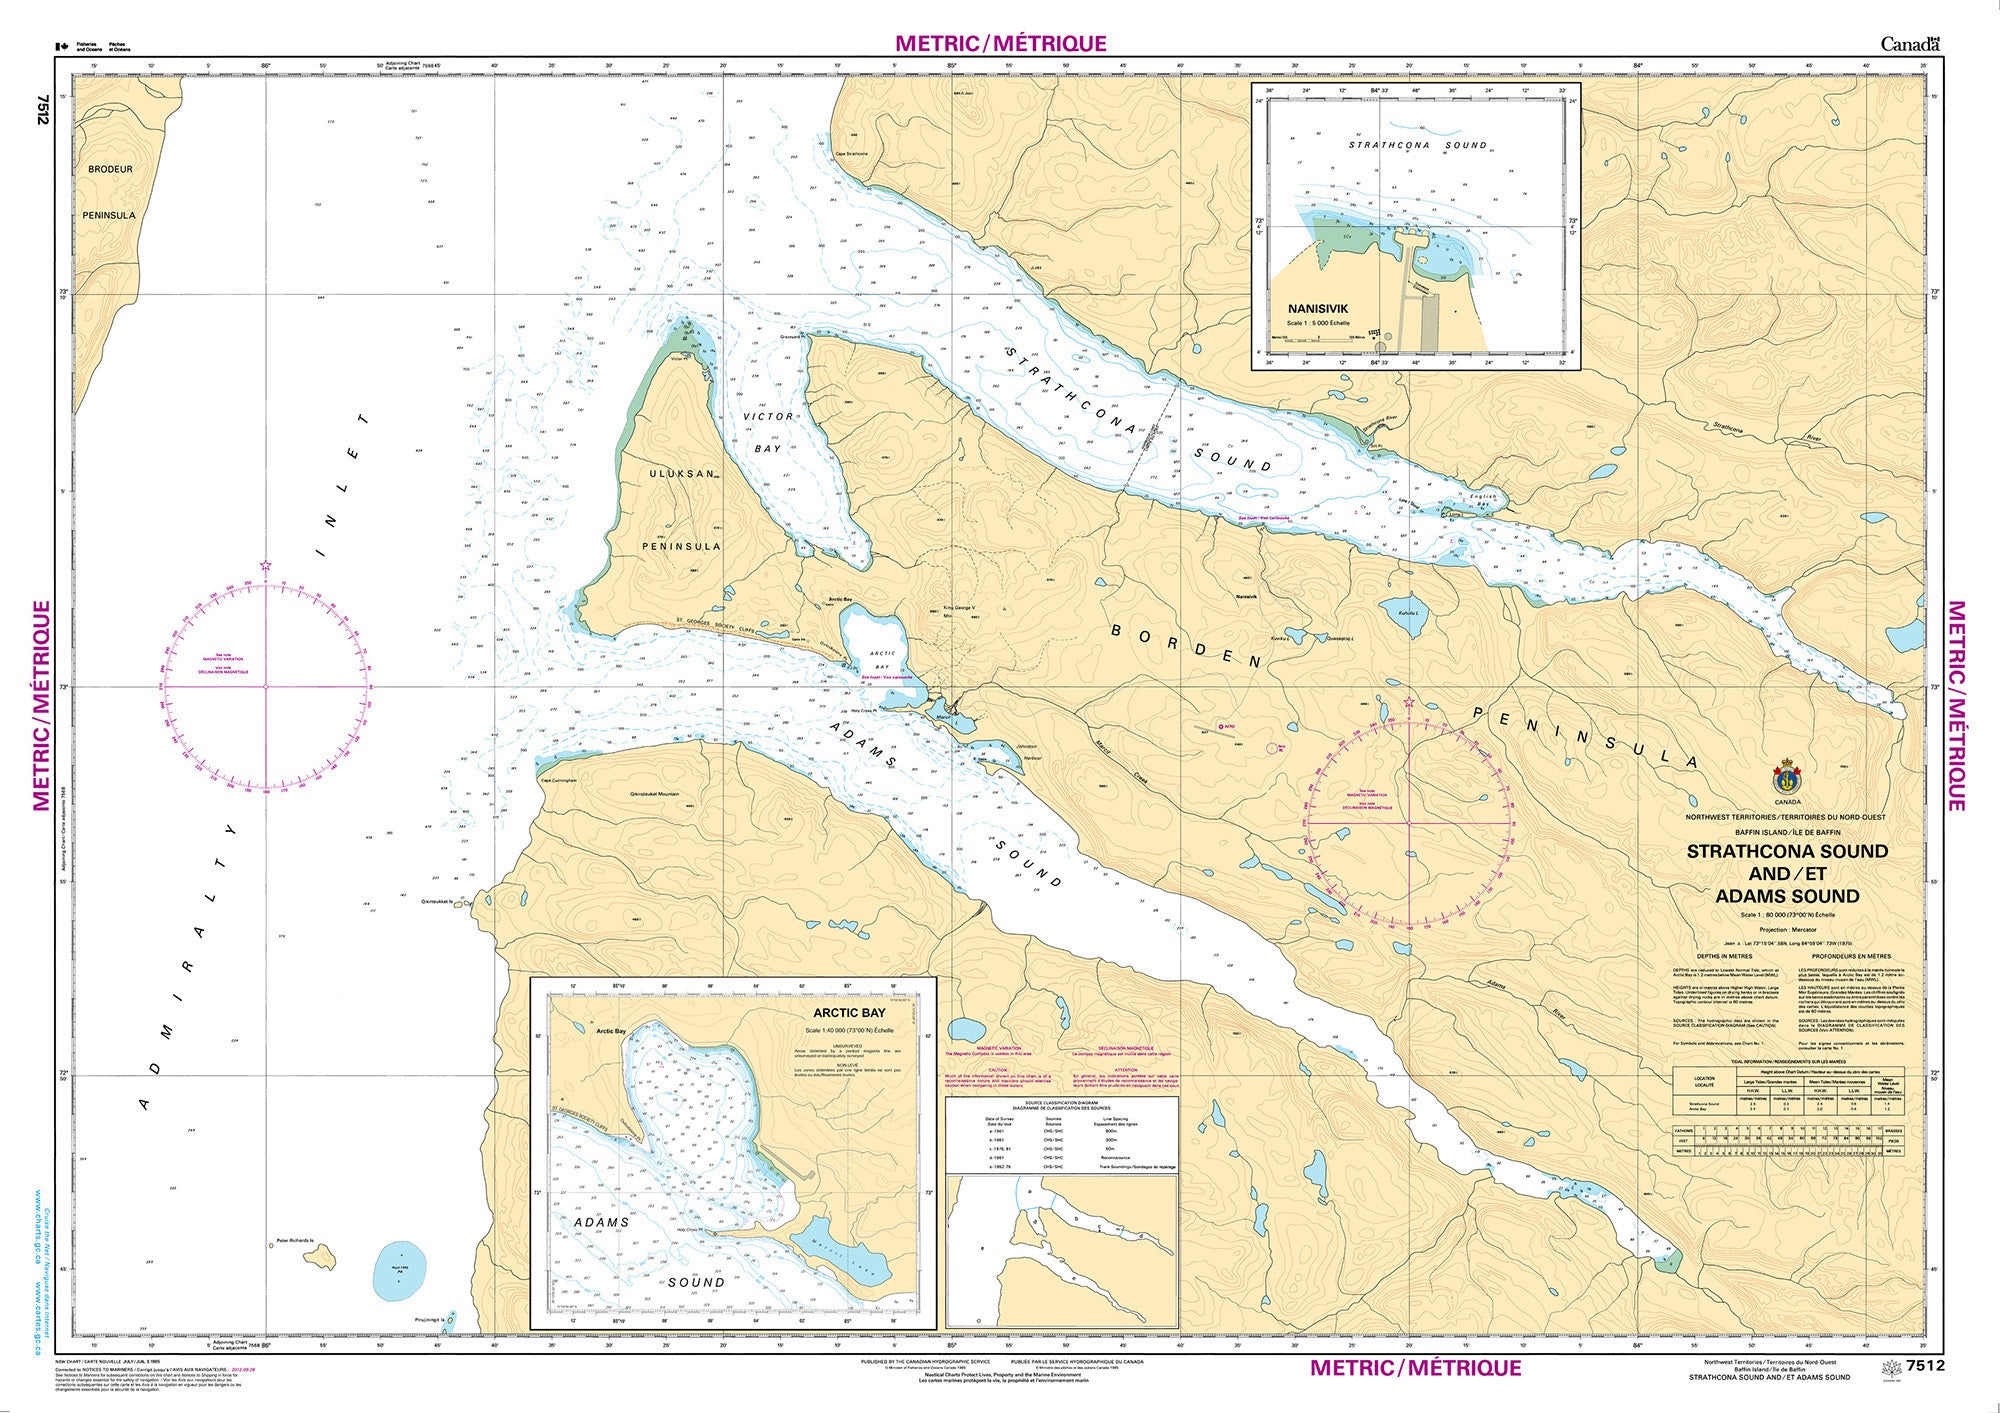 Canadian Hydrographic Service Nautical Chart CHS7512: Strathcona Sound and/et Adams Sound